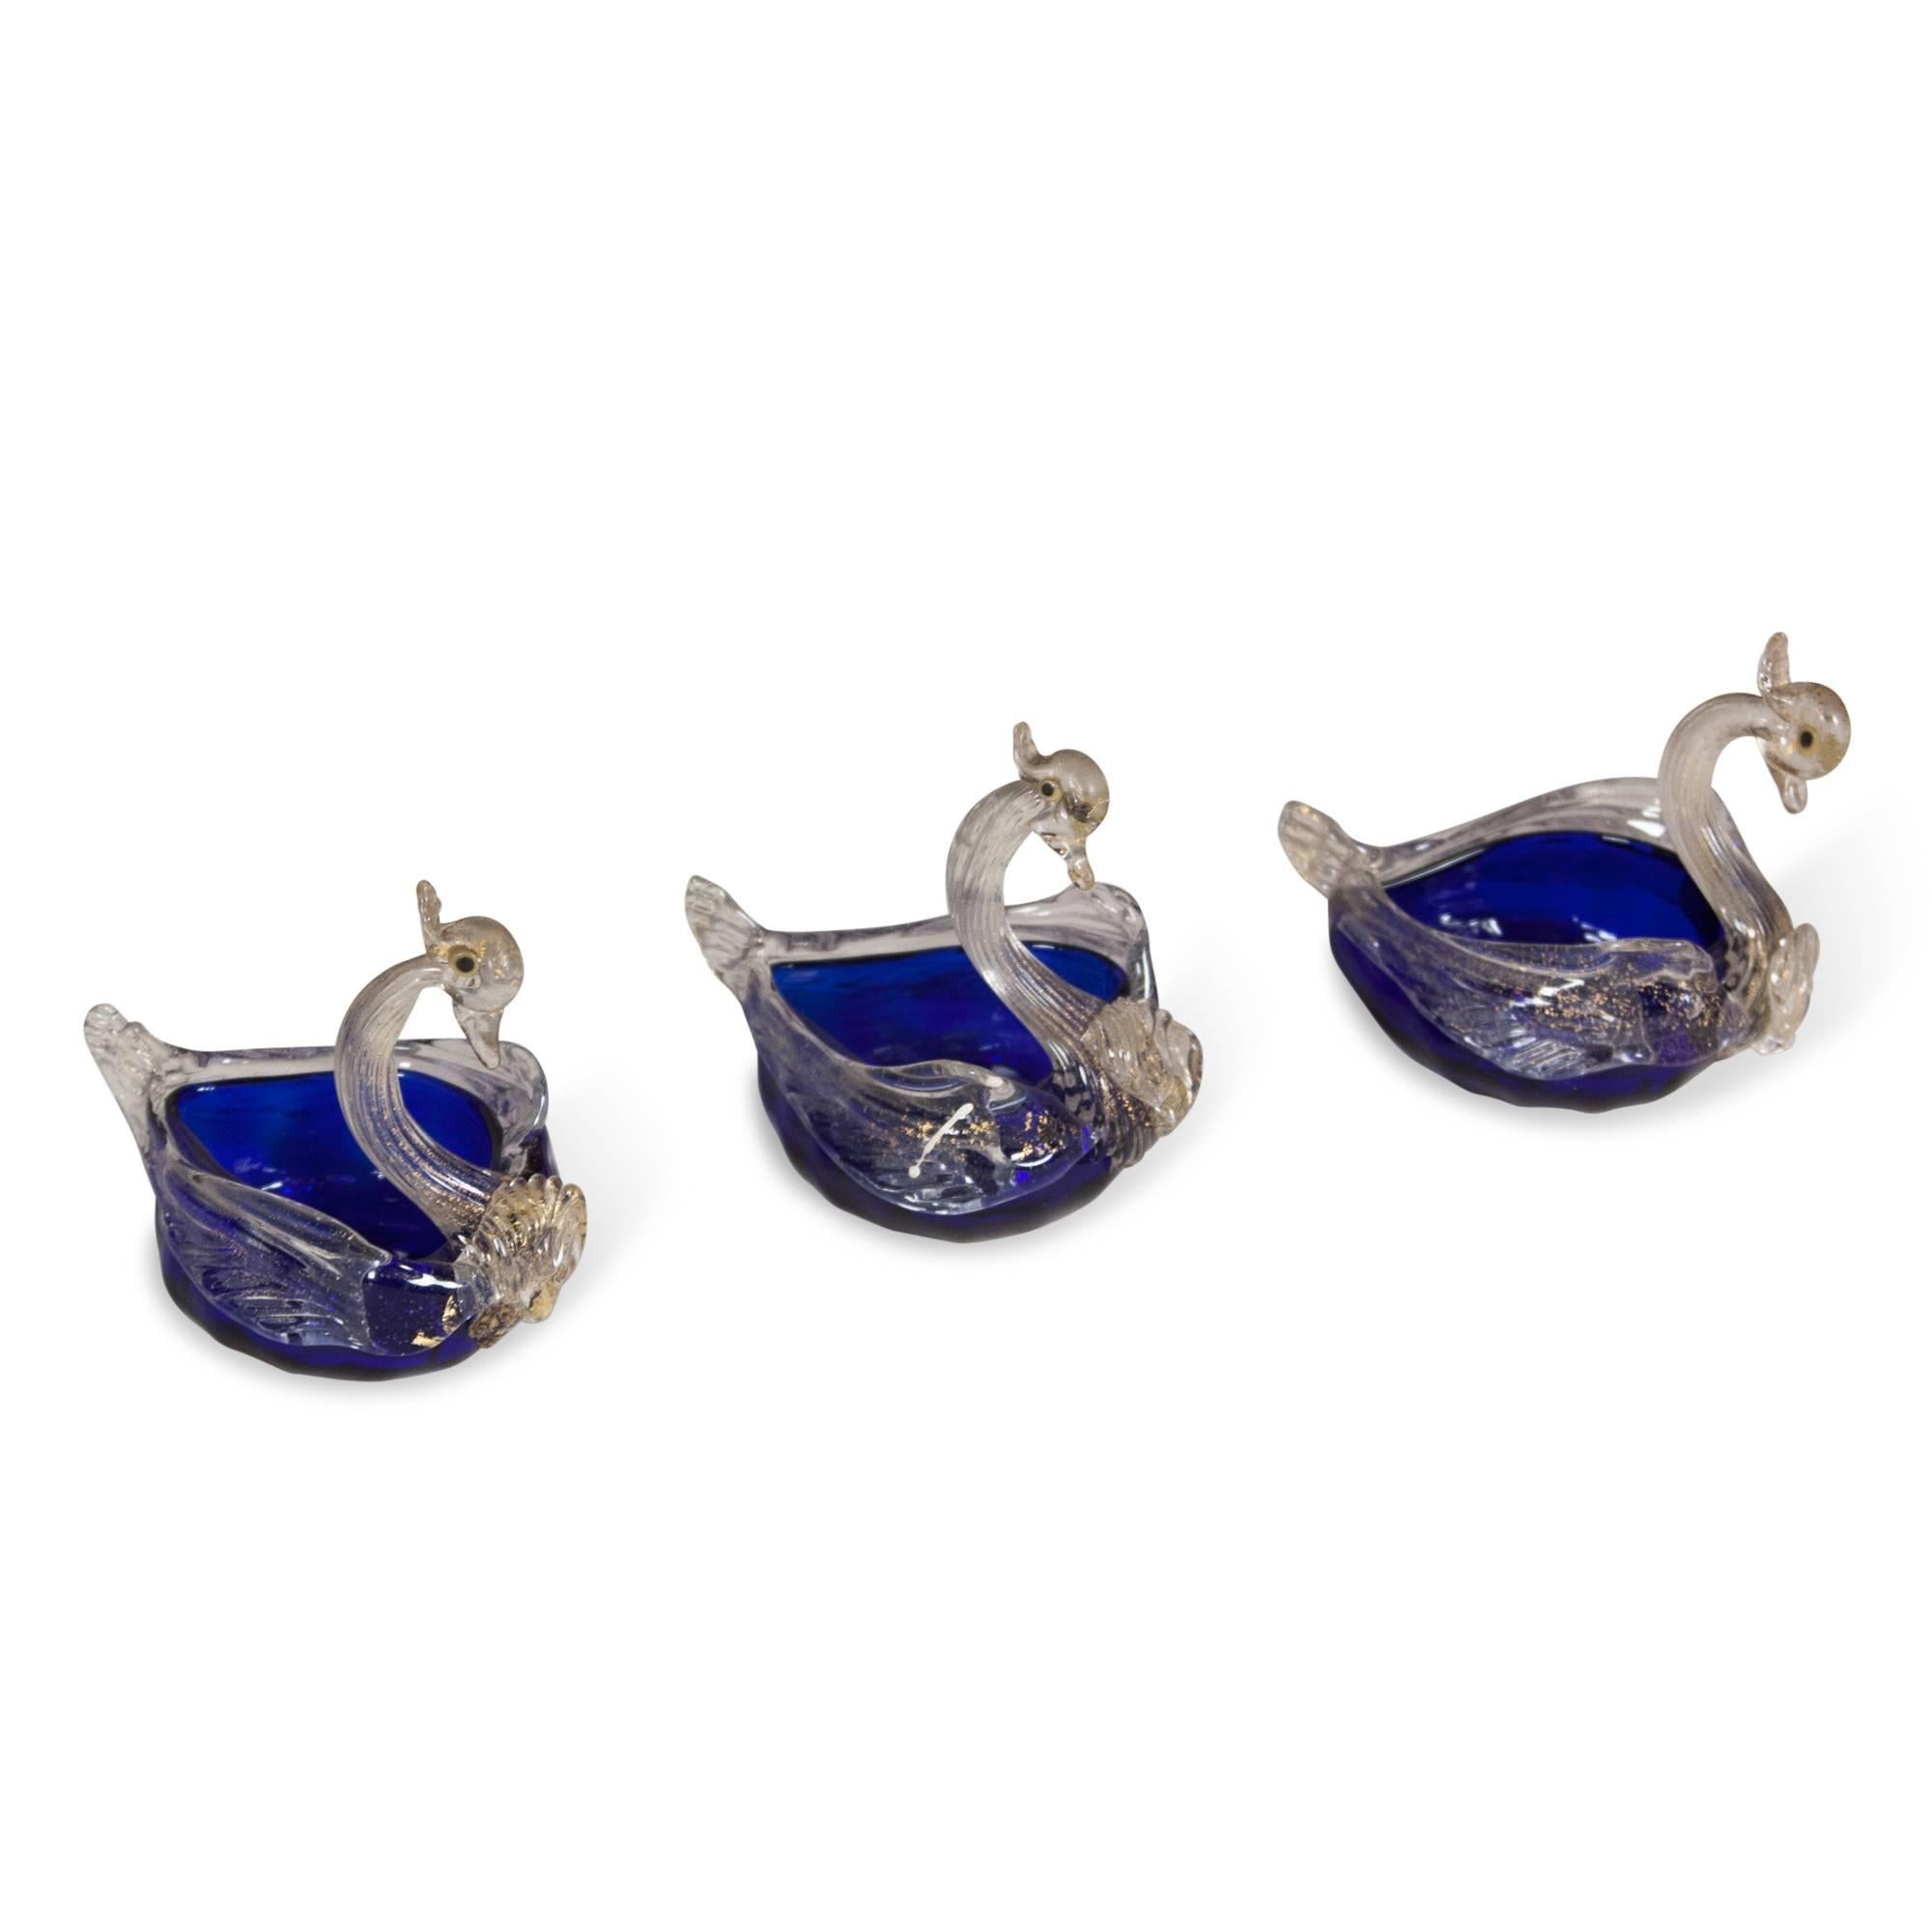 Set of three hand-blown glass swans, in clear and blue with gold inclusions, Murano, Italy 1960s. Height 3 in, length 4 in, width 2 1/2 in. (Item #2174 sats)